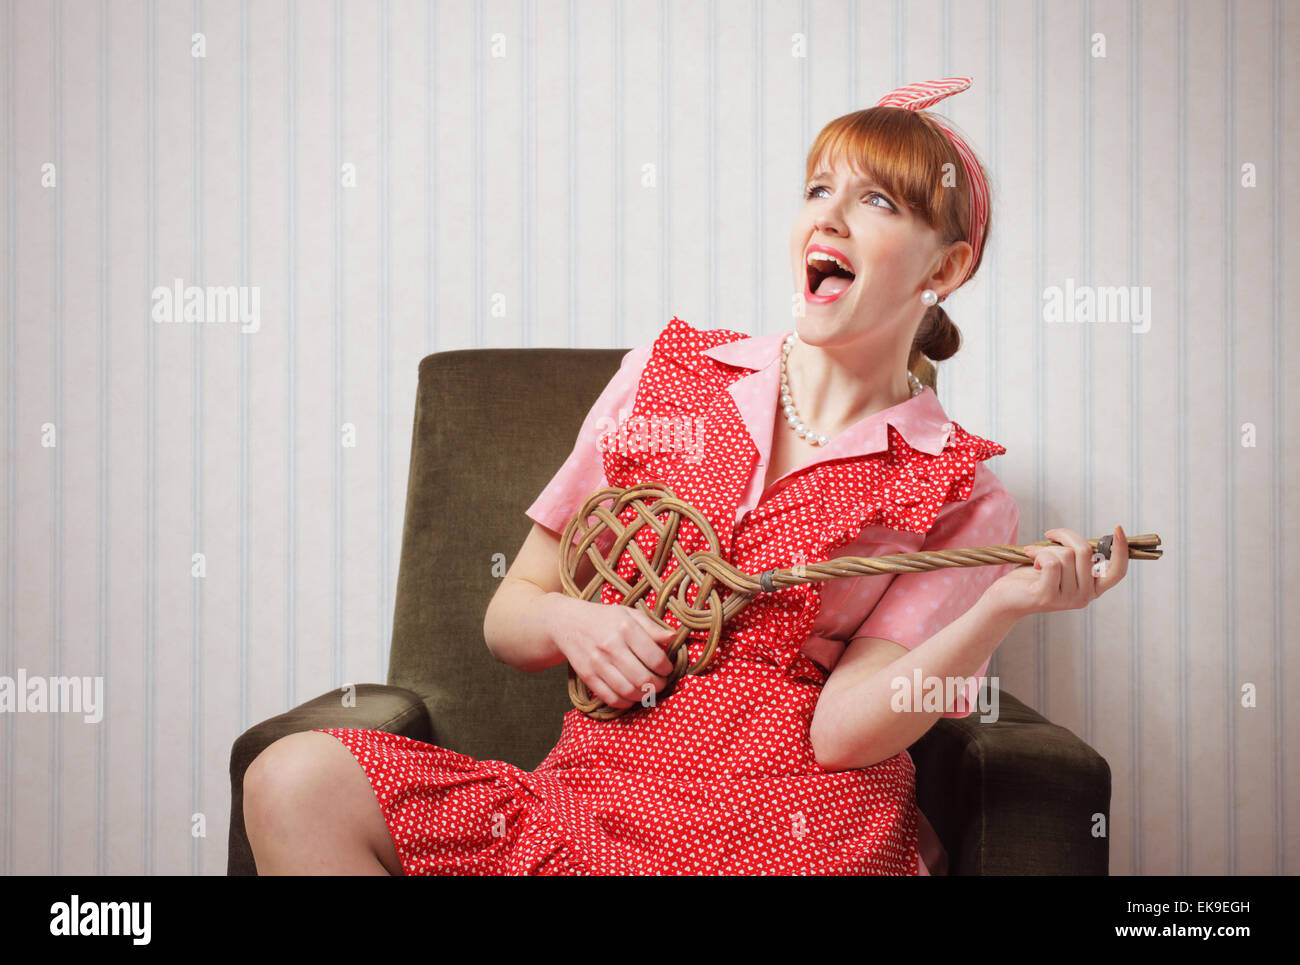 30+ Girls Who Tie Aprons Stock Photos, Pictures & Royalty-Free Images -  iStock